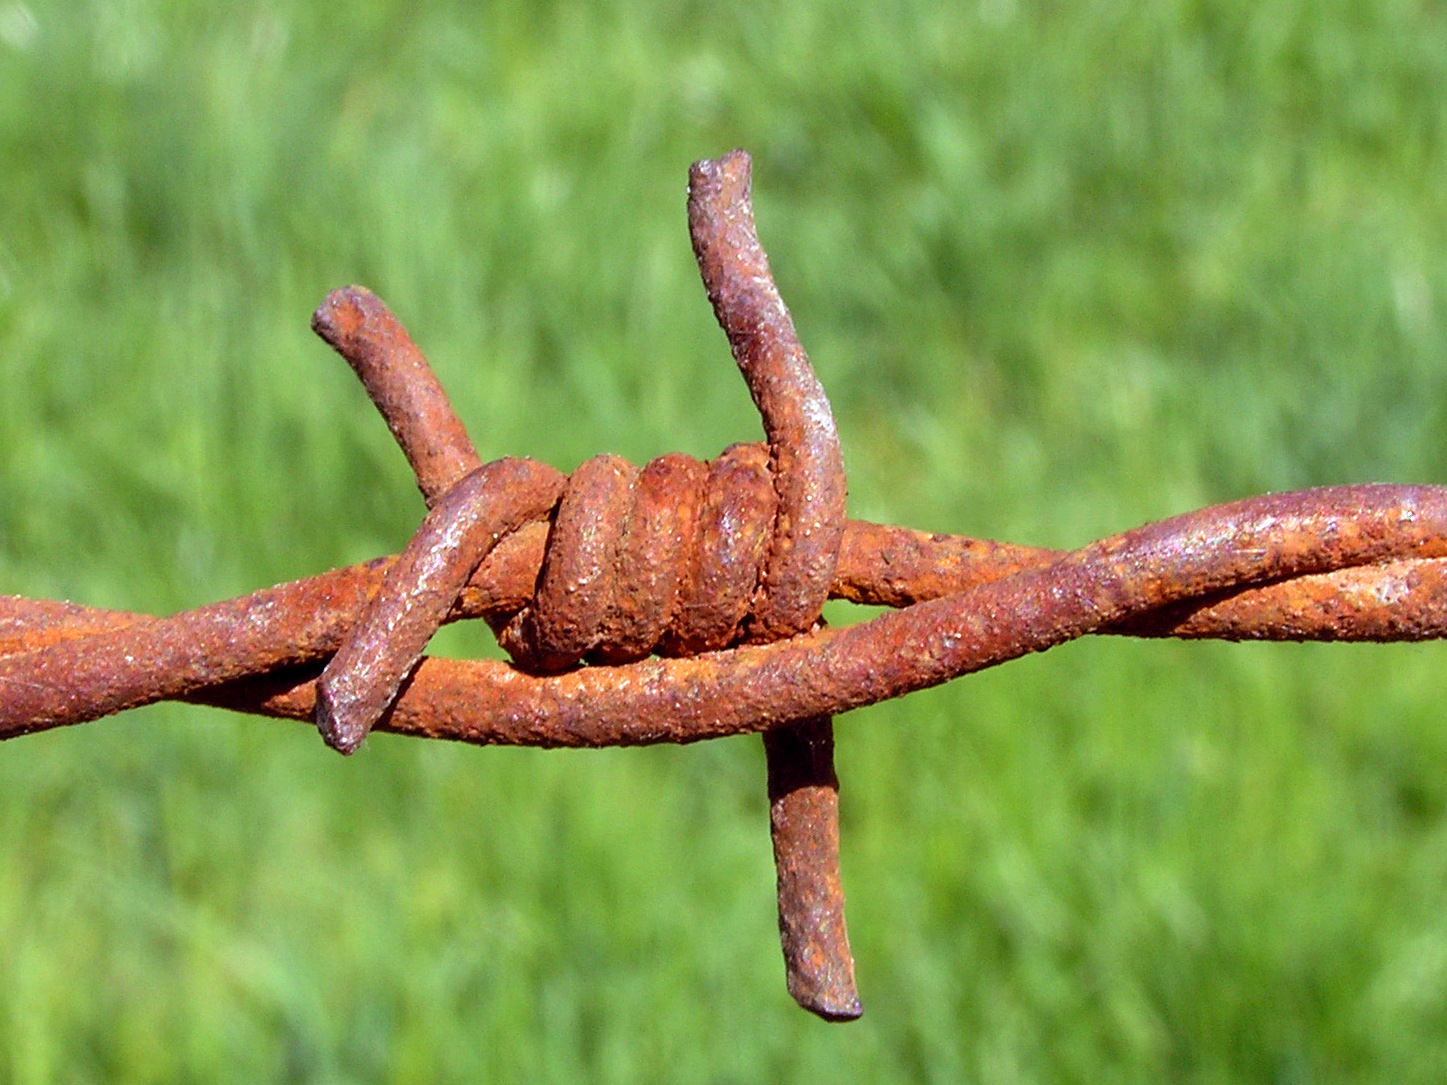 A close-up of rusted barbed wire.